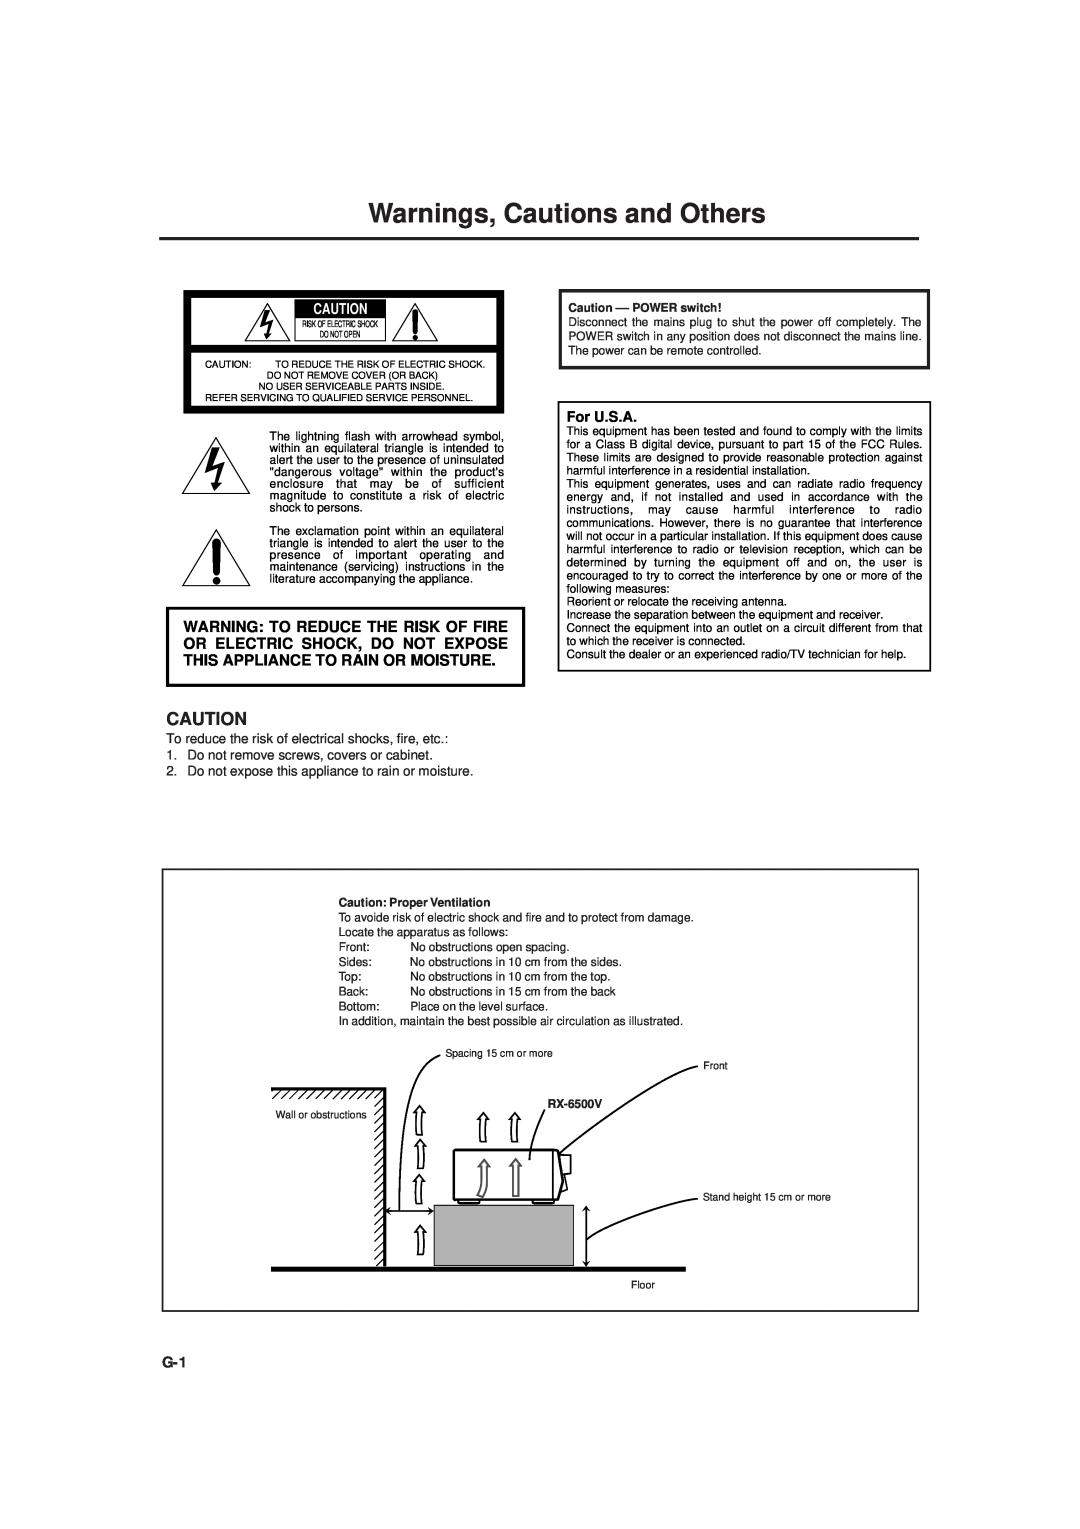 JVC RX-6500VBK manual Warnings, Cautions and Others, For U.S.A, Caution --POWER switch, Caution Proper Ventilation 